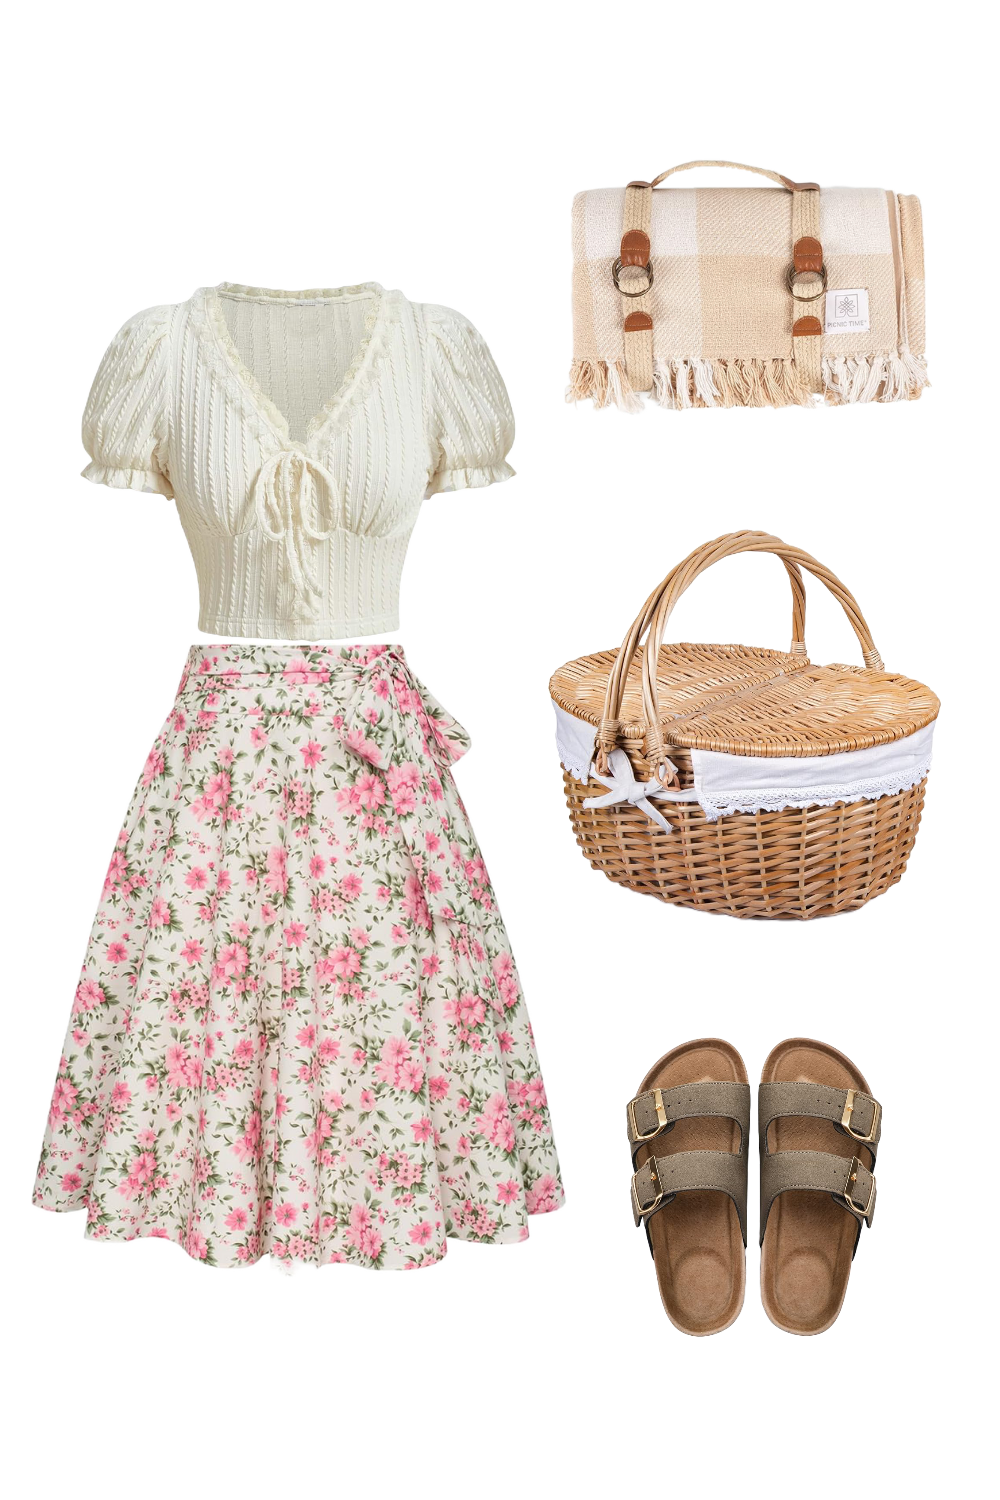 Picnic Girl | Shop the Look